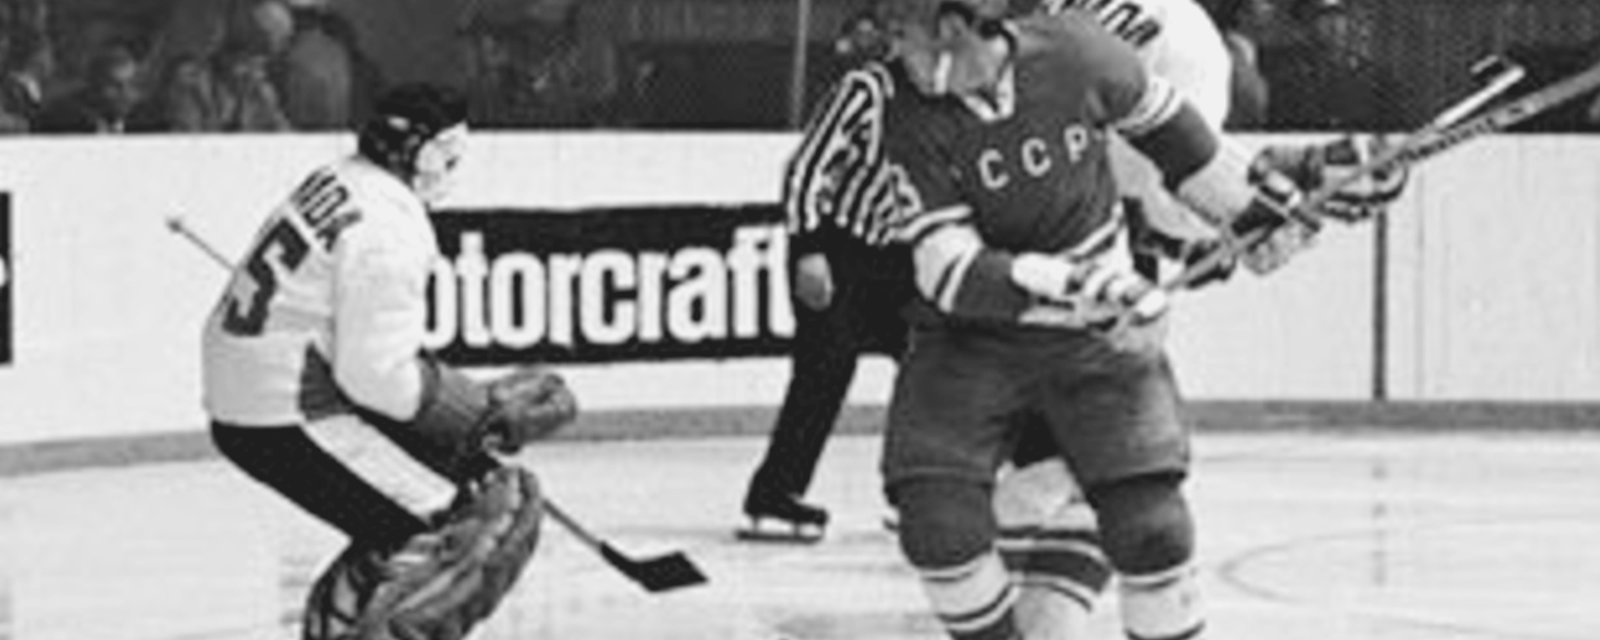 Former HOCKEY STAR of the 1972 Summit Series has died at the age of 66